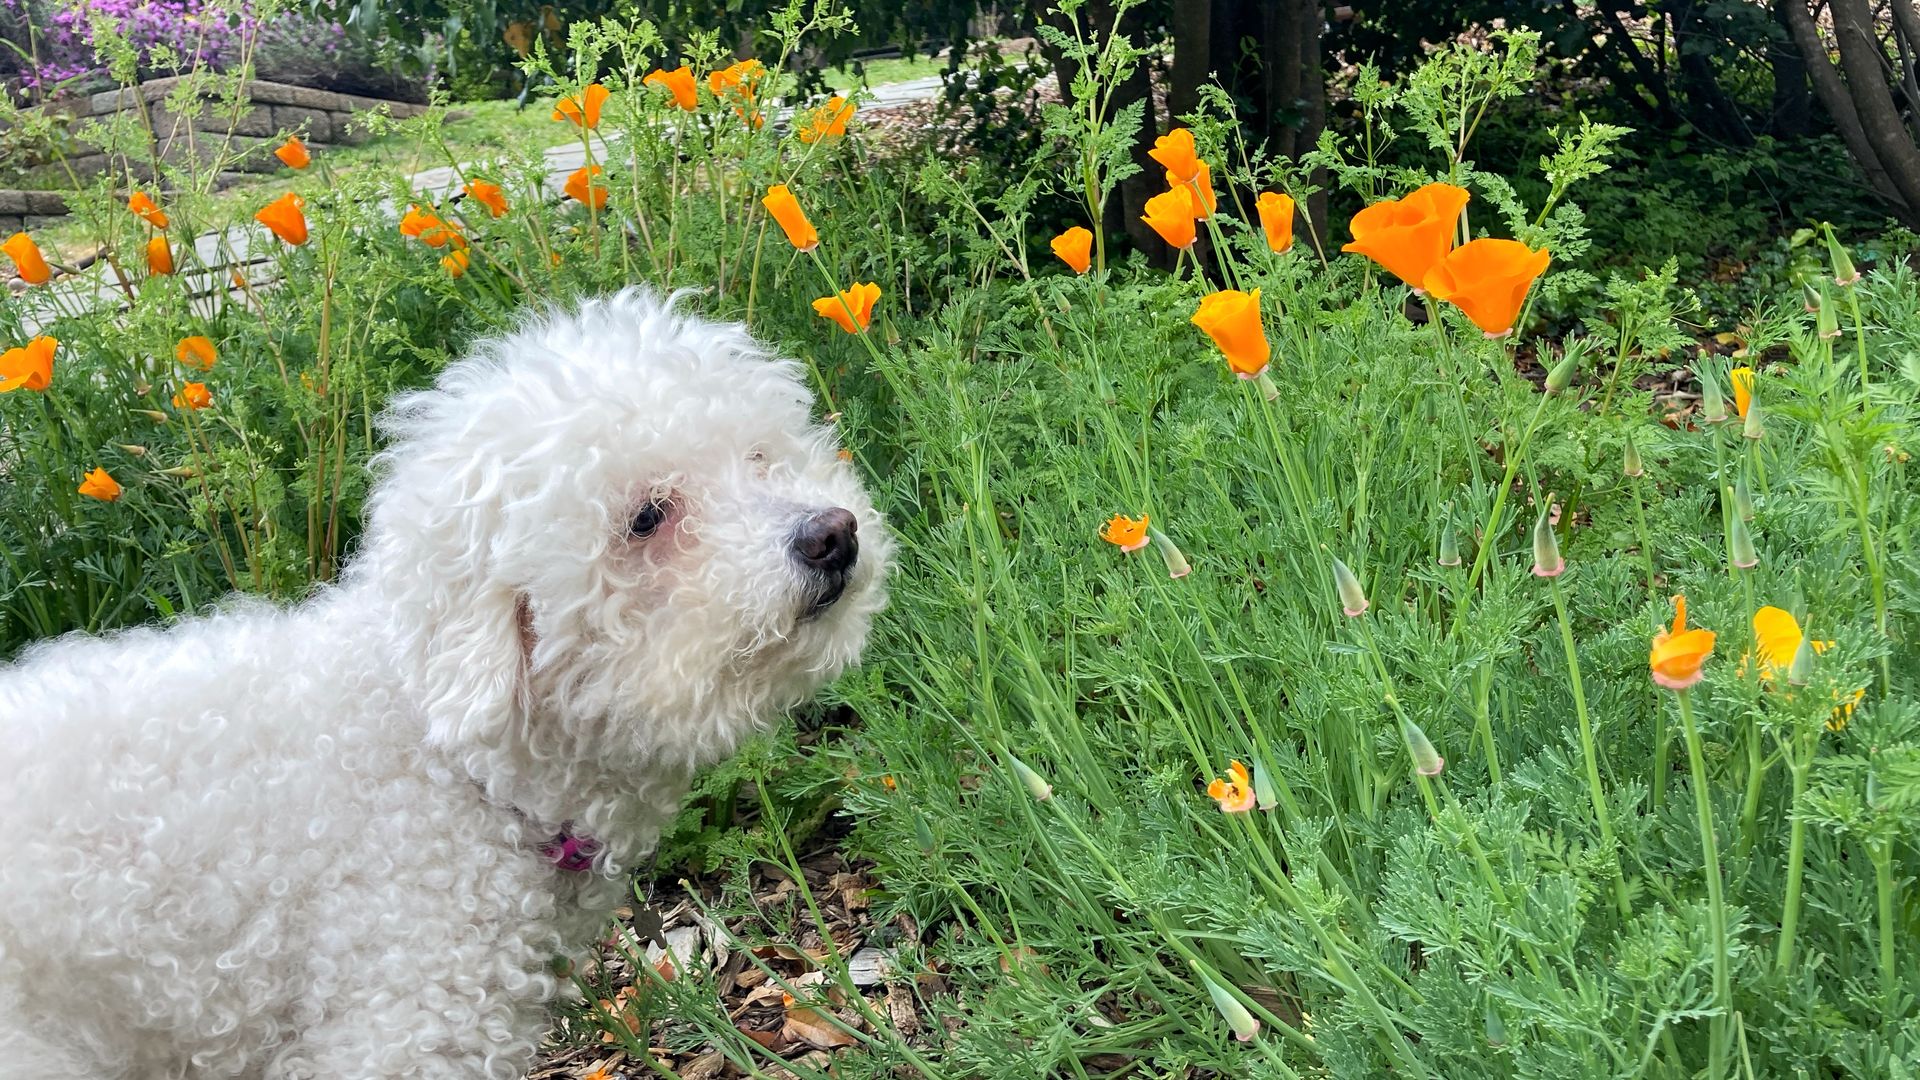 Photo of a fluffy white dog smelling a cluster of orange poppies